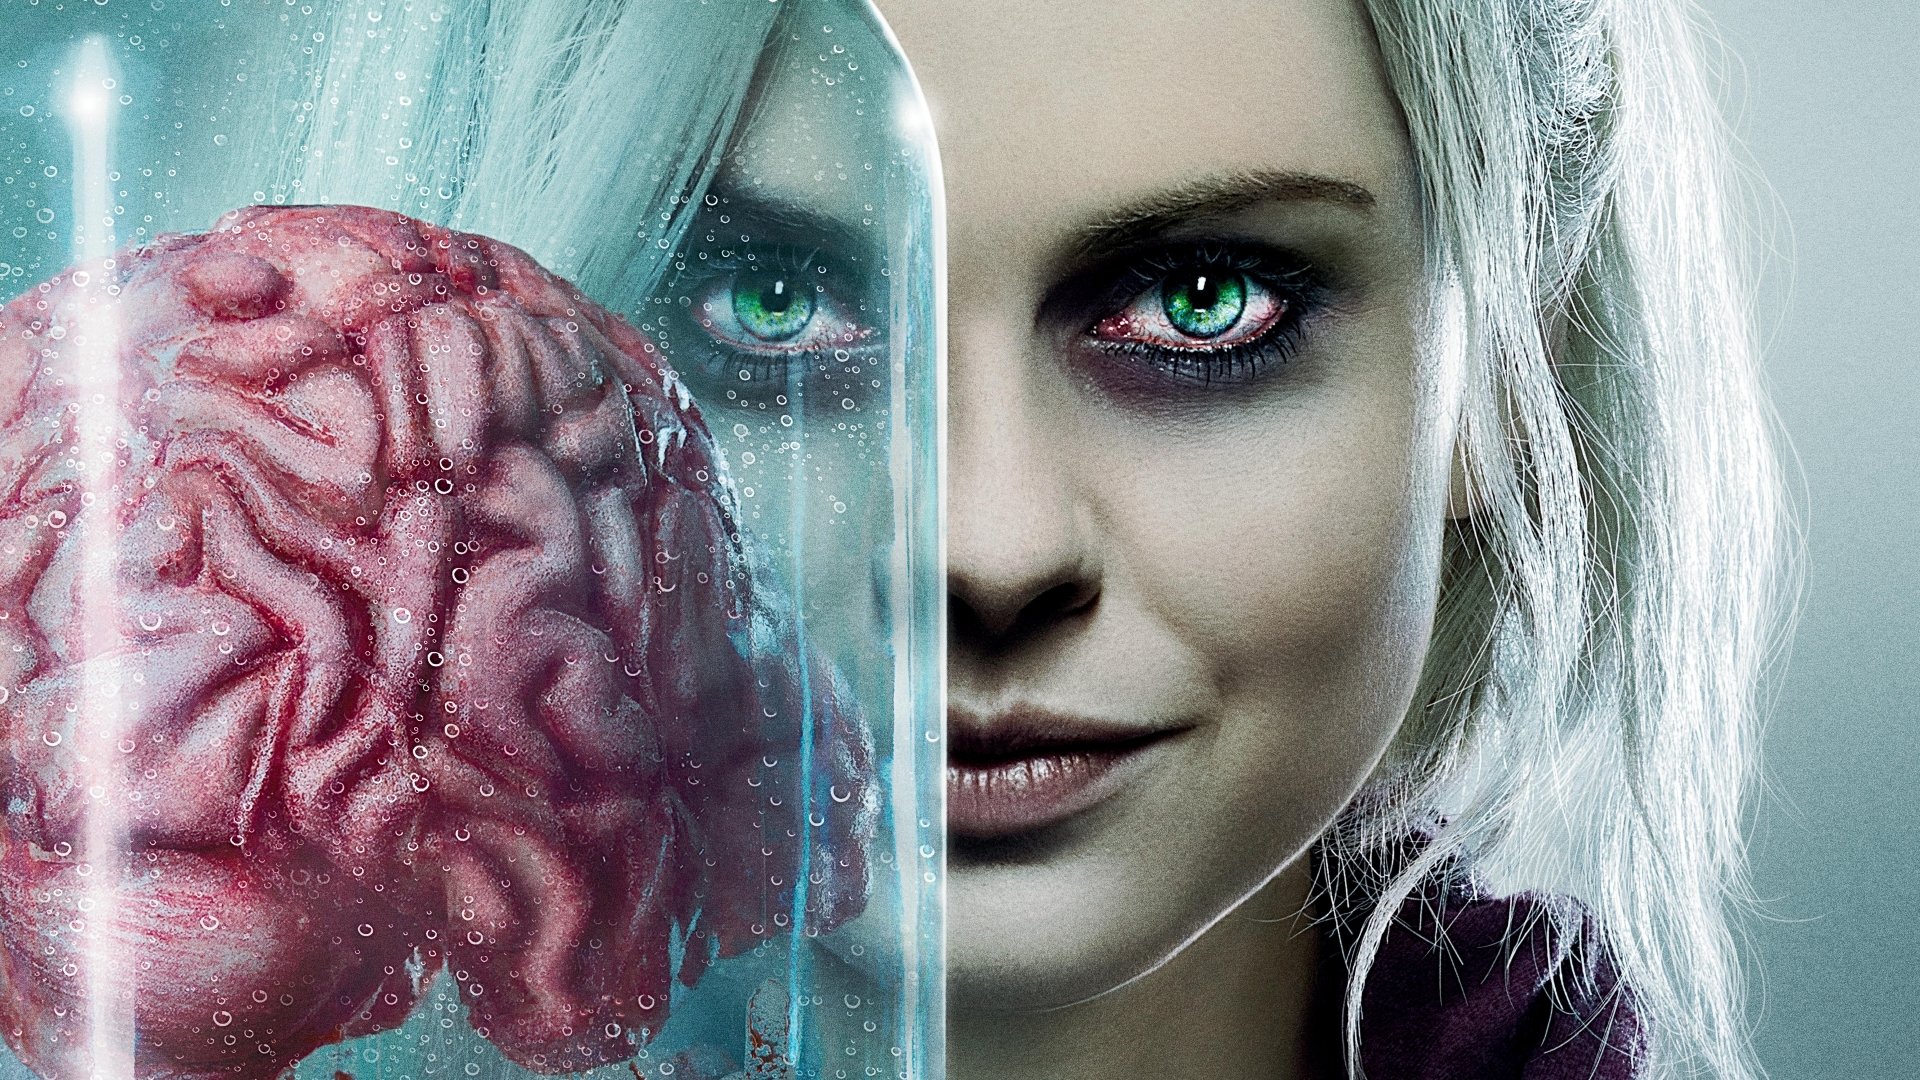 Wallpaper the series horror Comedy Robert Buckley Rose McIver iZombie Rose  McIver Izombie Kicking ass and taking brains Satisfied With Kohls  Malcolm Goodwin David Anders images for desktop section фильмы  download